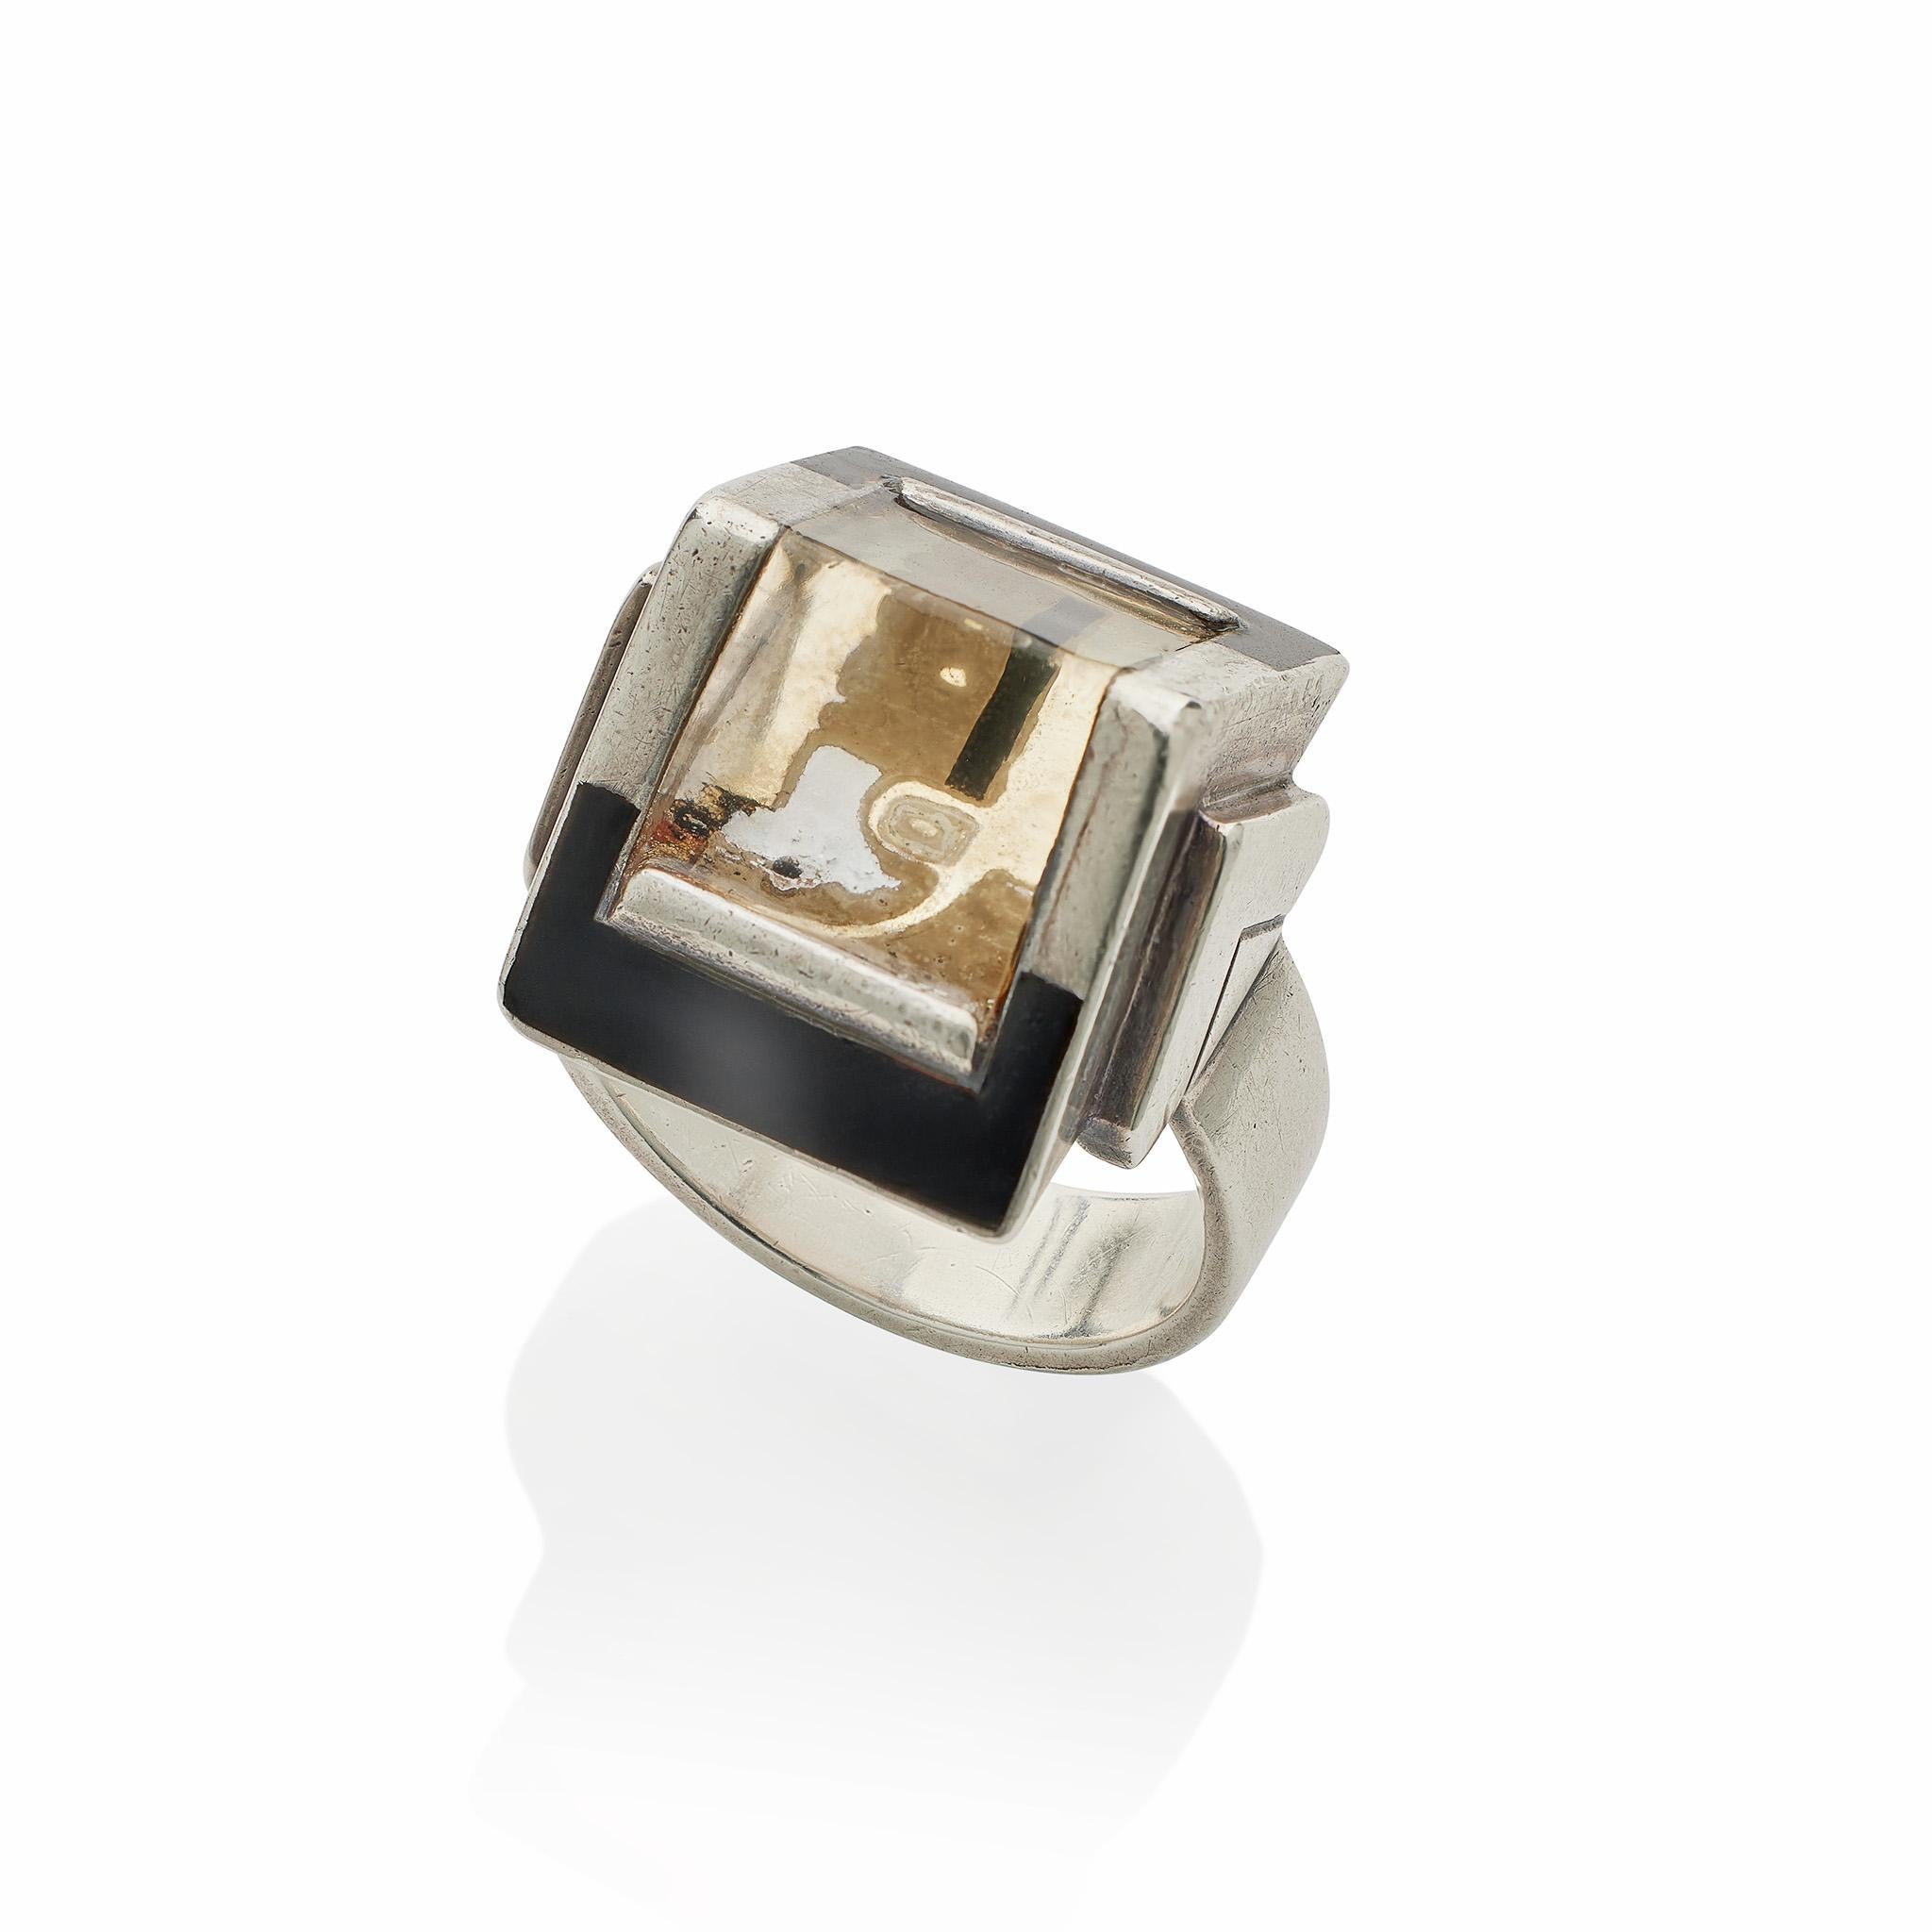 Composed of silver, lacquer and reverse painted and engraved crystal, this exceptional ring was a collaboration of two French modernist artists, Després and Cornault. The ring centers a glass crystal prism above a polychrome abstract-design painting